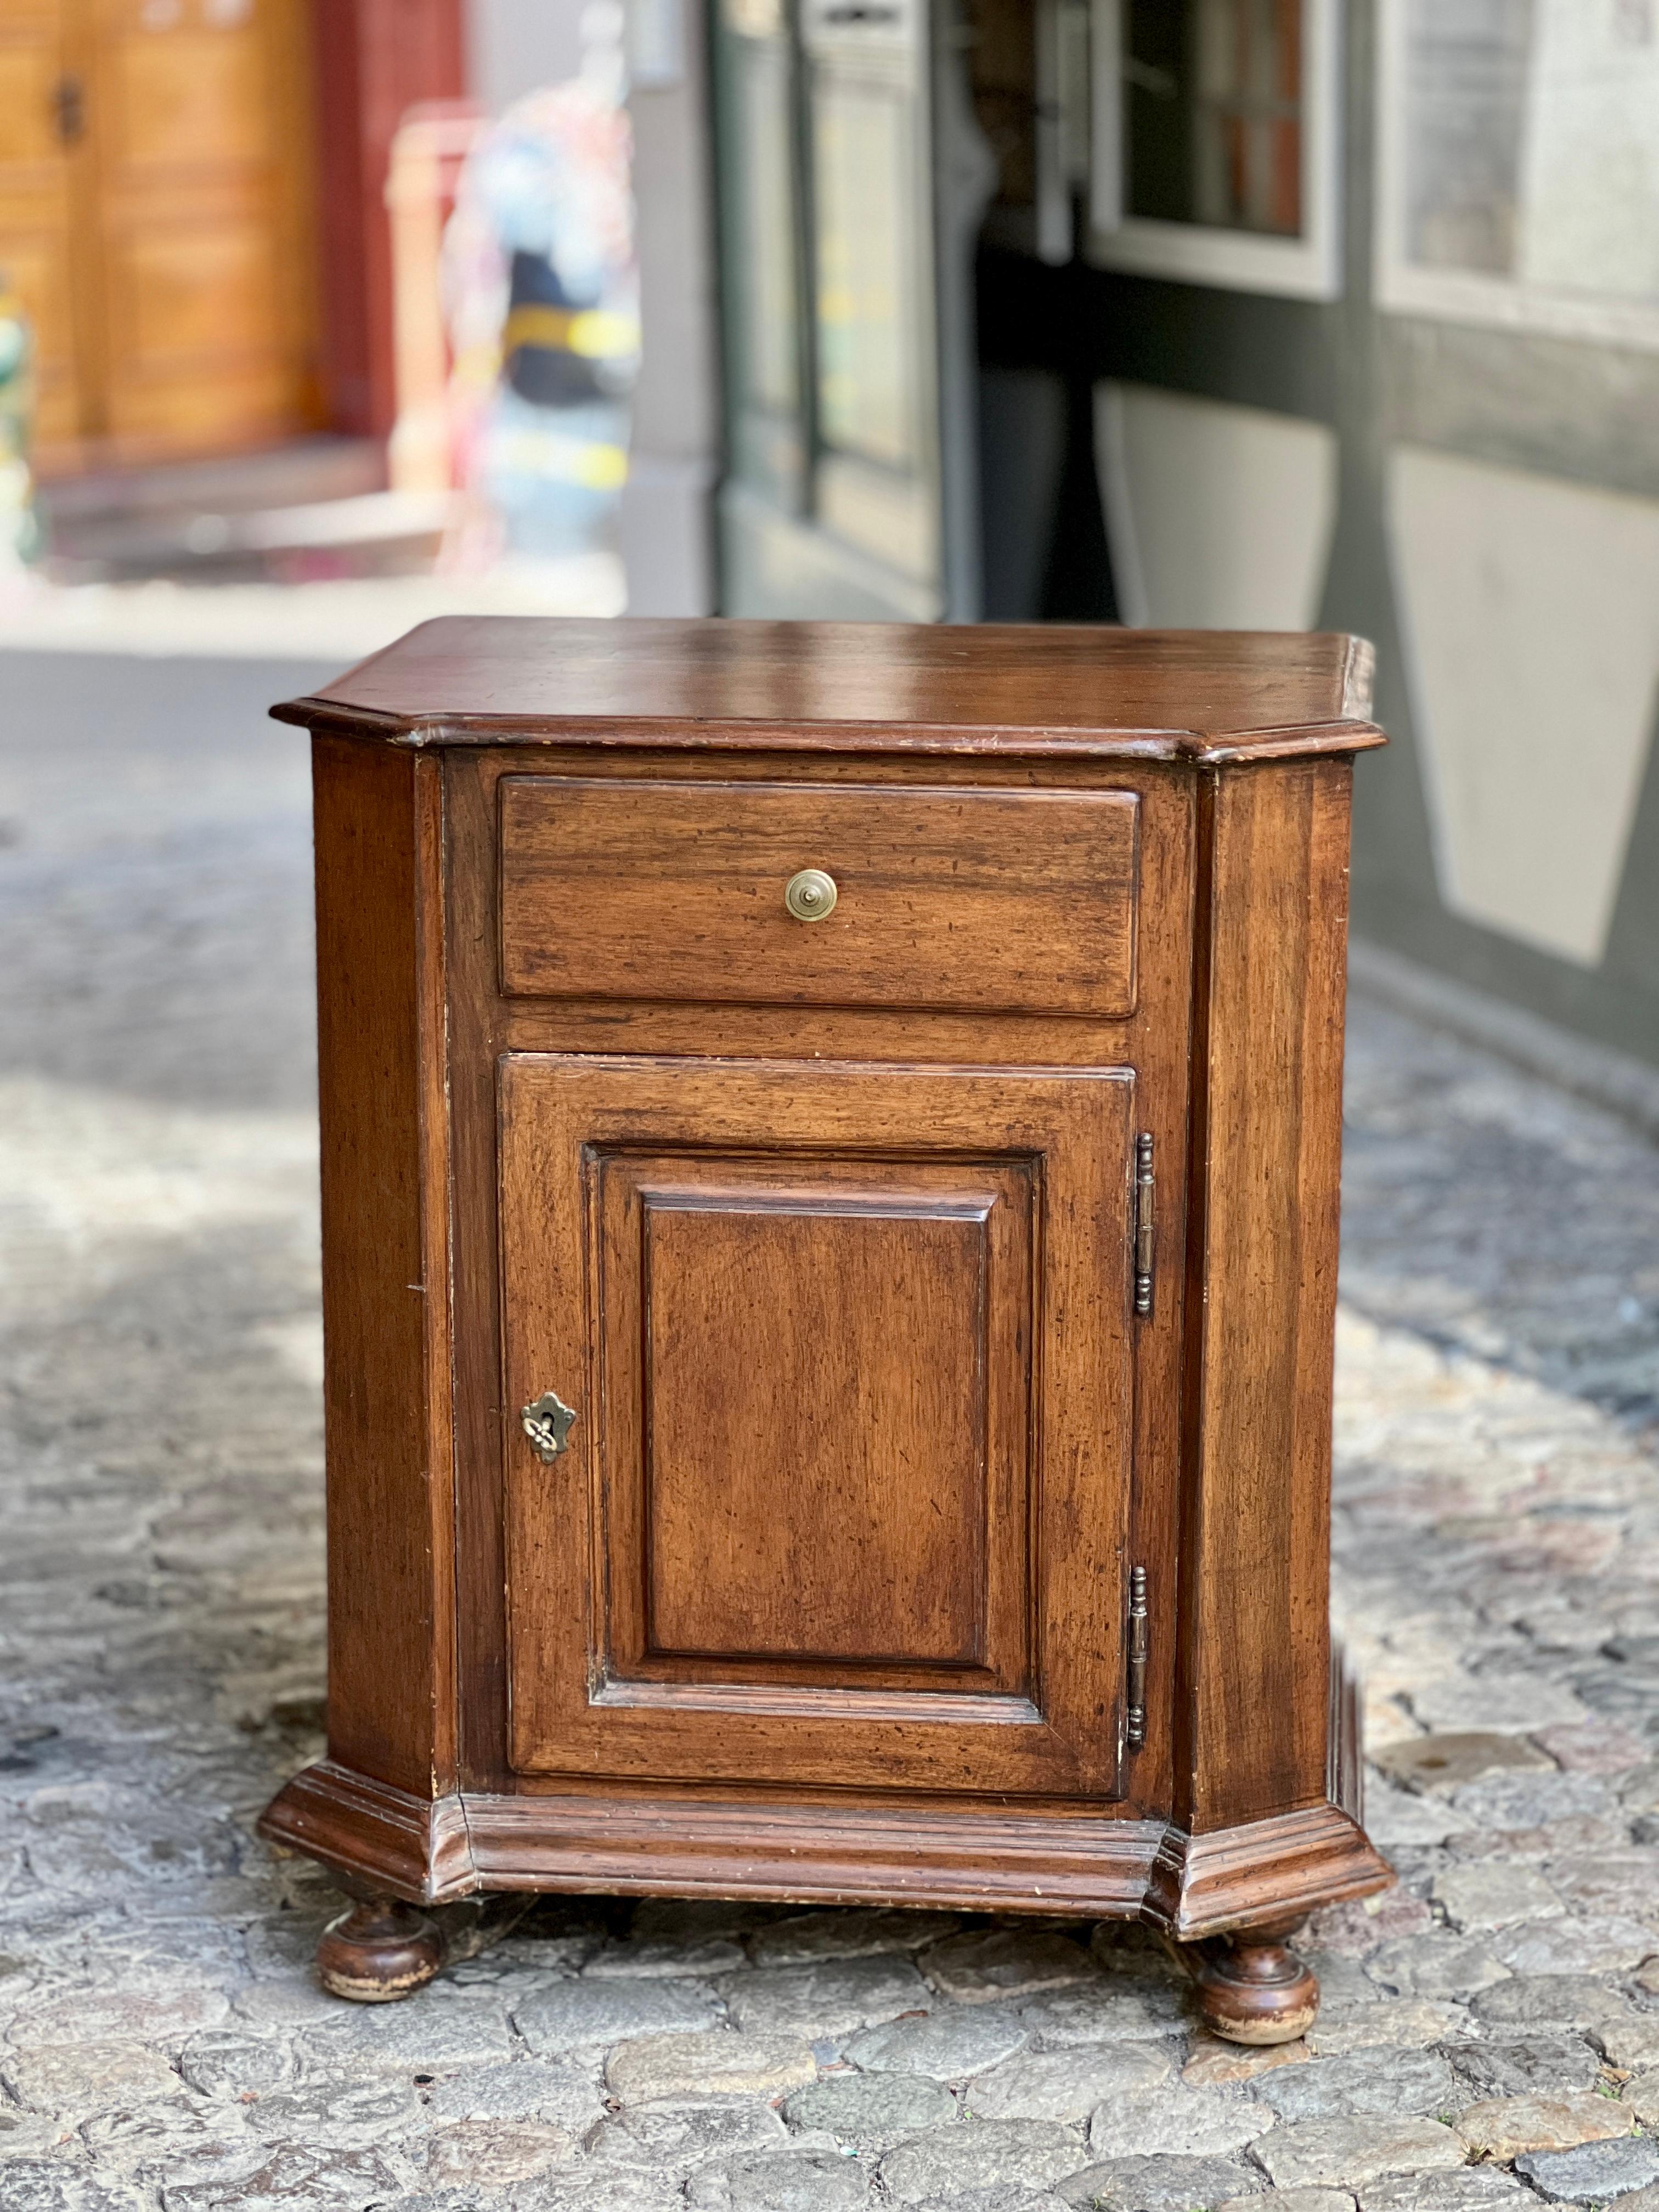 Neat very well made and functional small late 18th century sideboard / cupboard from France. Made in oak, with one drawer and a comparment with two shelves behind the door underneath. Rustic, but elegant. Good measures makes it easy to place in. The